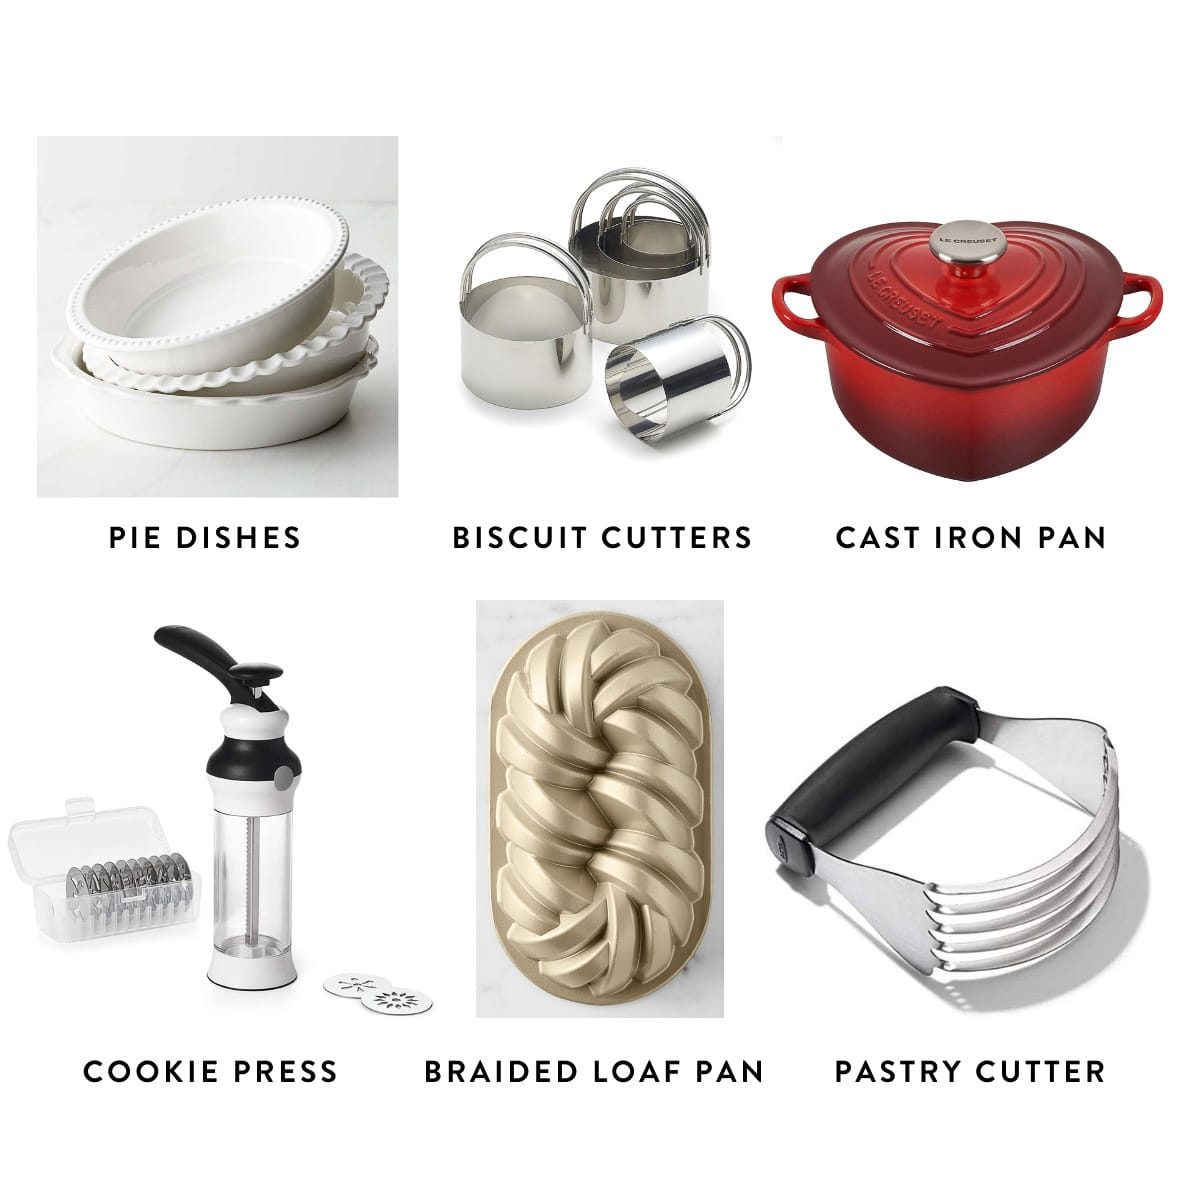 collage of graphics of different baking items including cast iron pan, white pie dishes, braided loaf pan, and more.